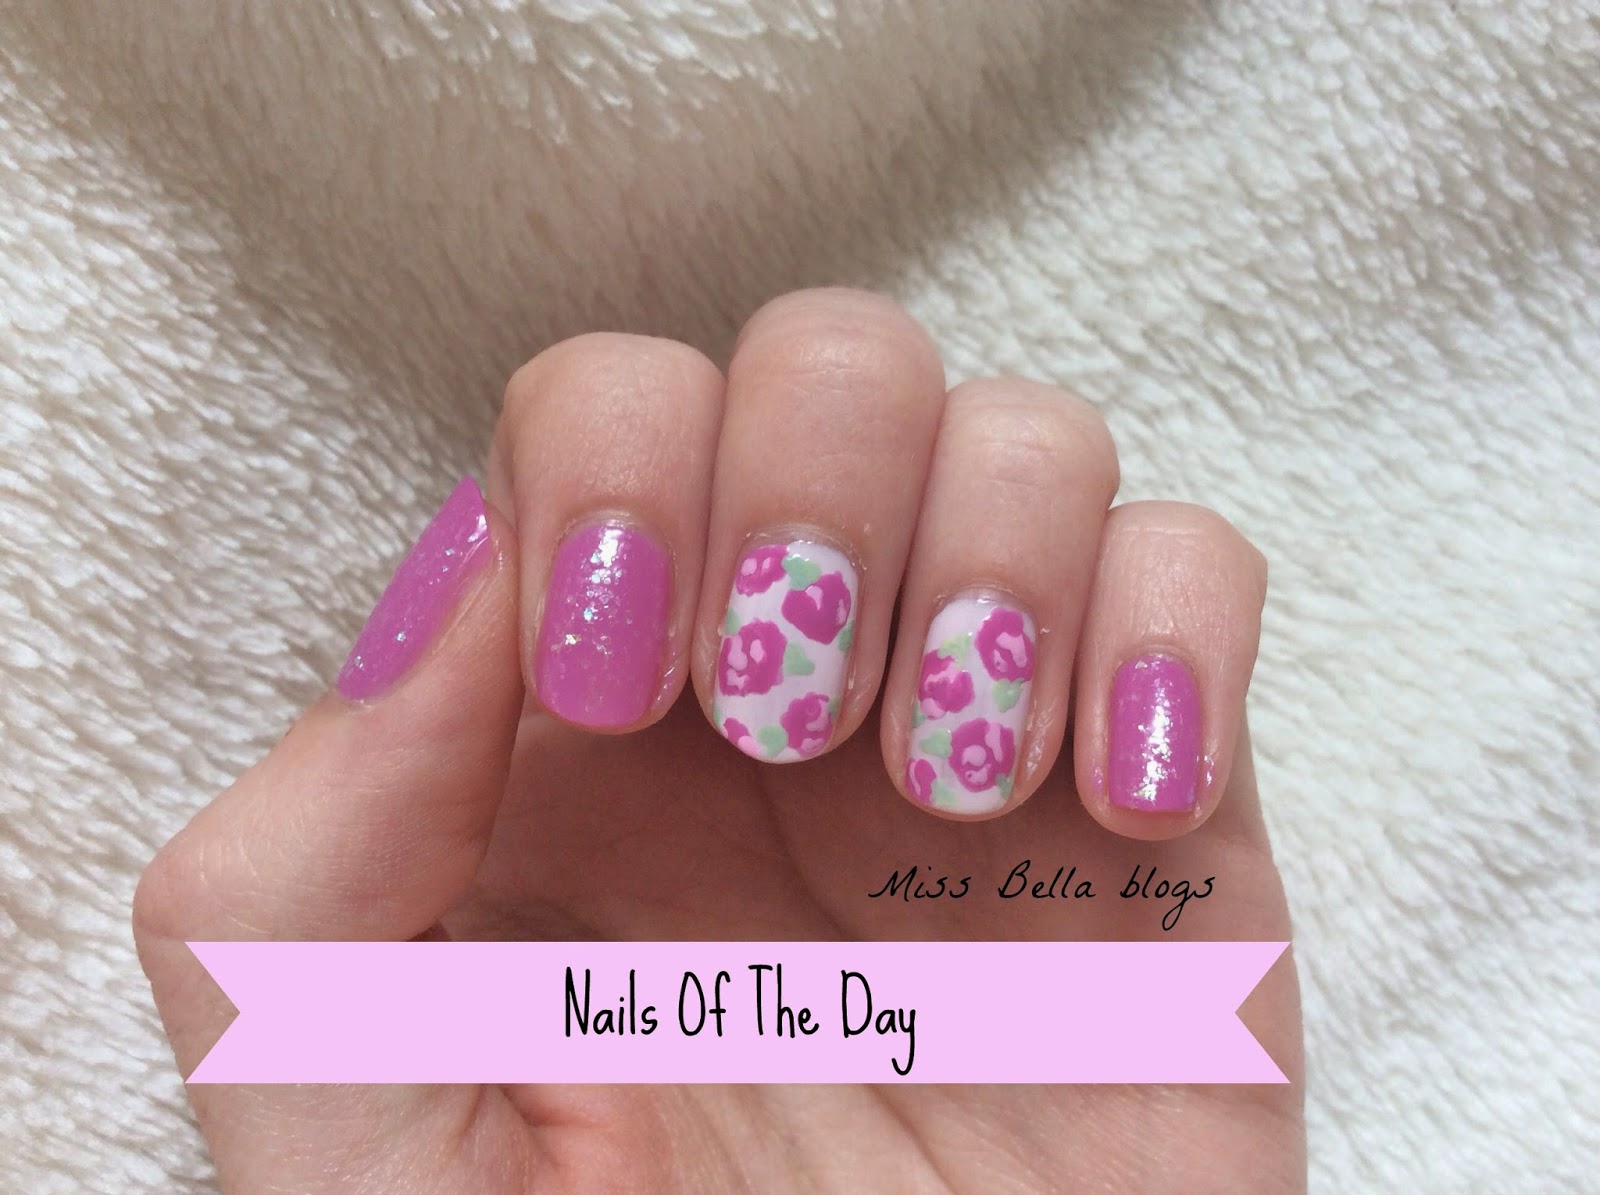 Miss Bella blogs: Nails Of The Day